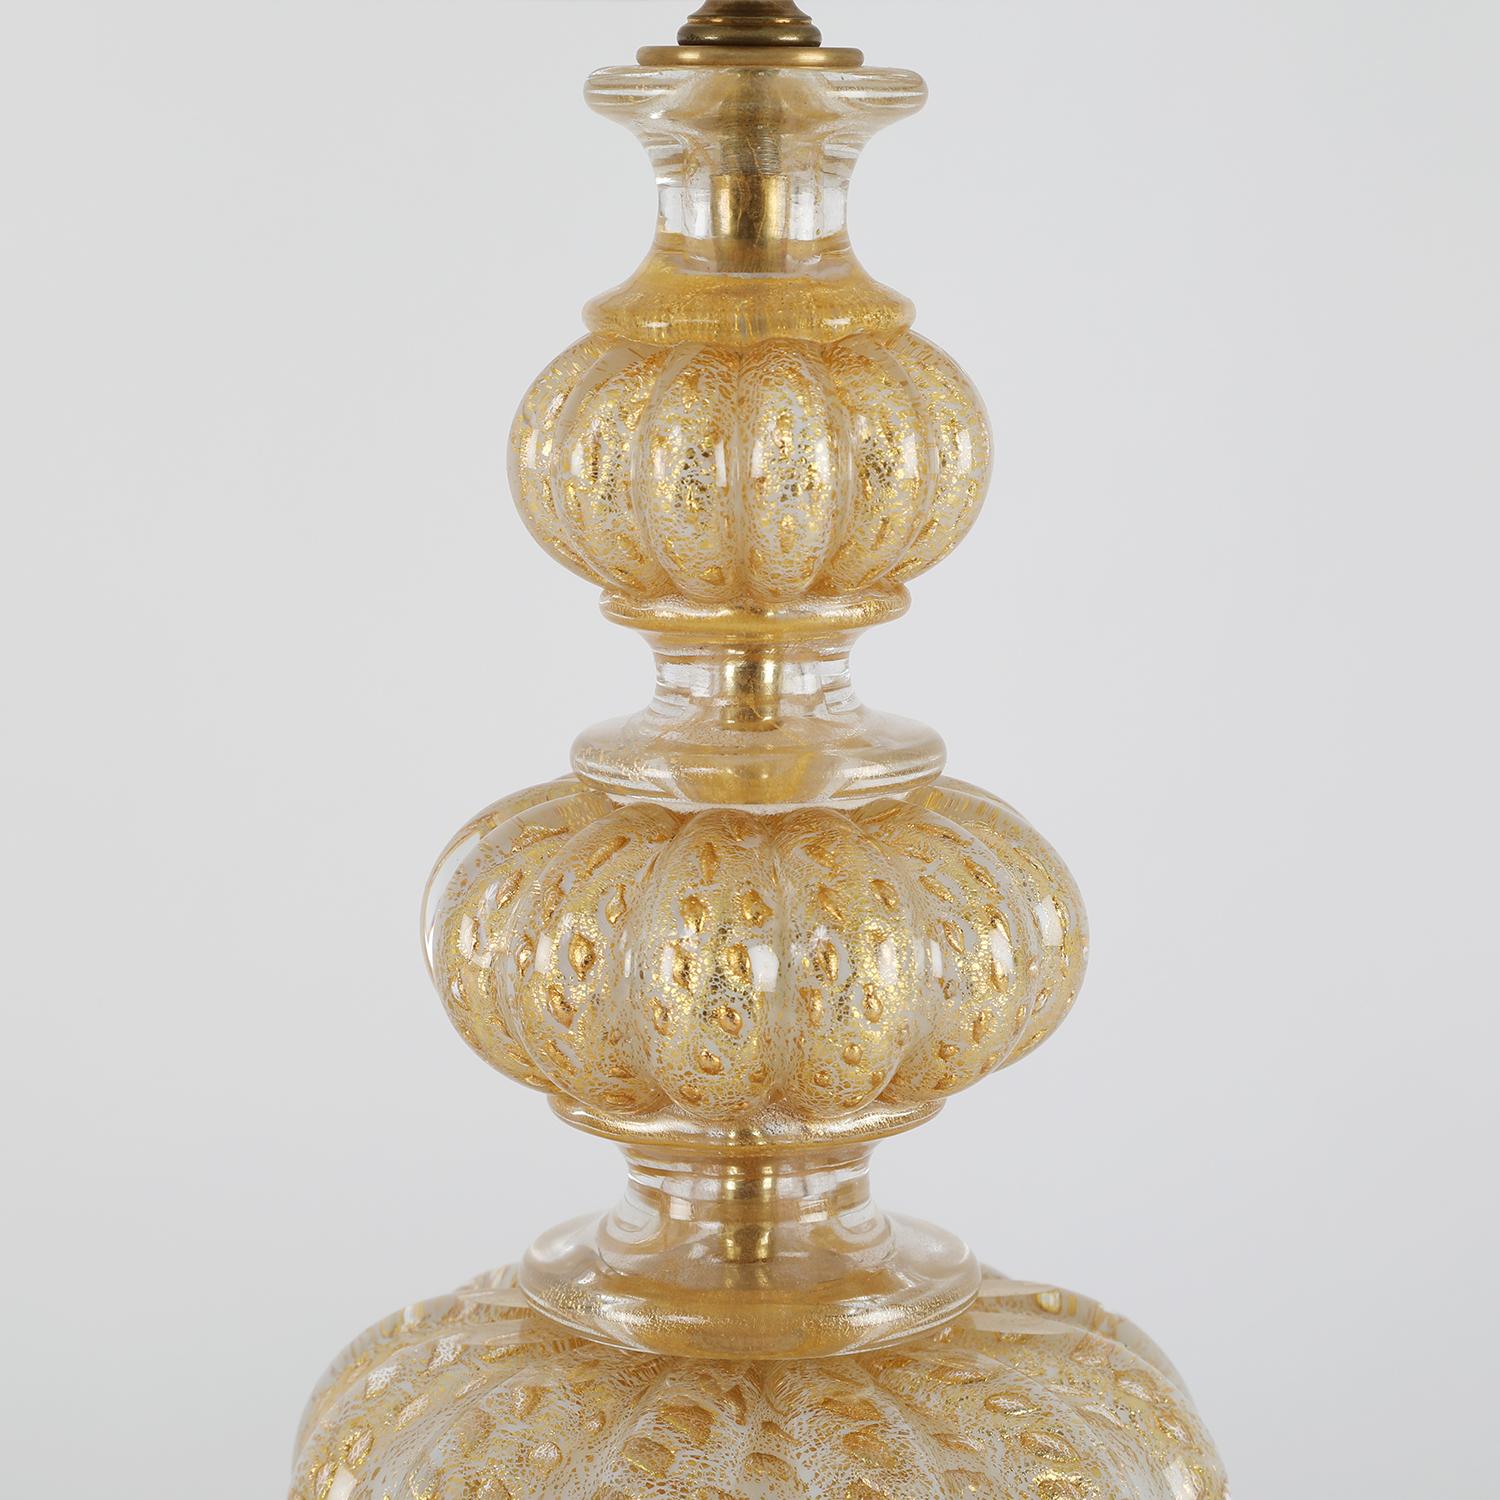 Pair of beautiful hand blown table lamps, Cordonato D'Oro technique, by Barovier & Toso, Murano, Italy, 1950s. These lamps are exquisite. Newly rewired.

Measures: Shade diameter 16 inches
Shade height 10.5 inches.